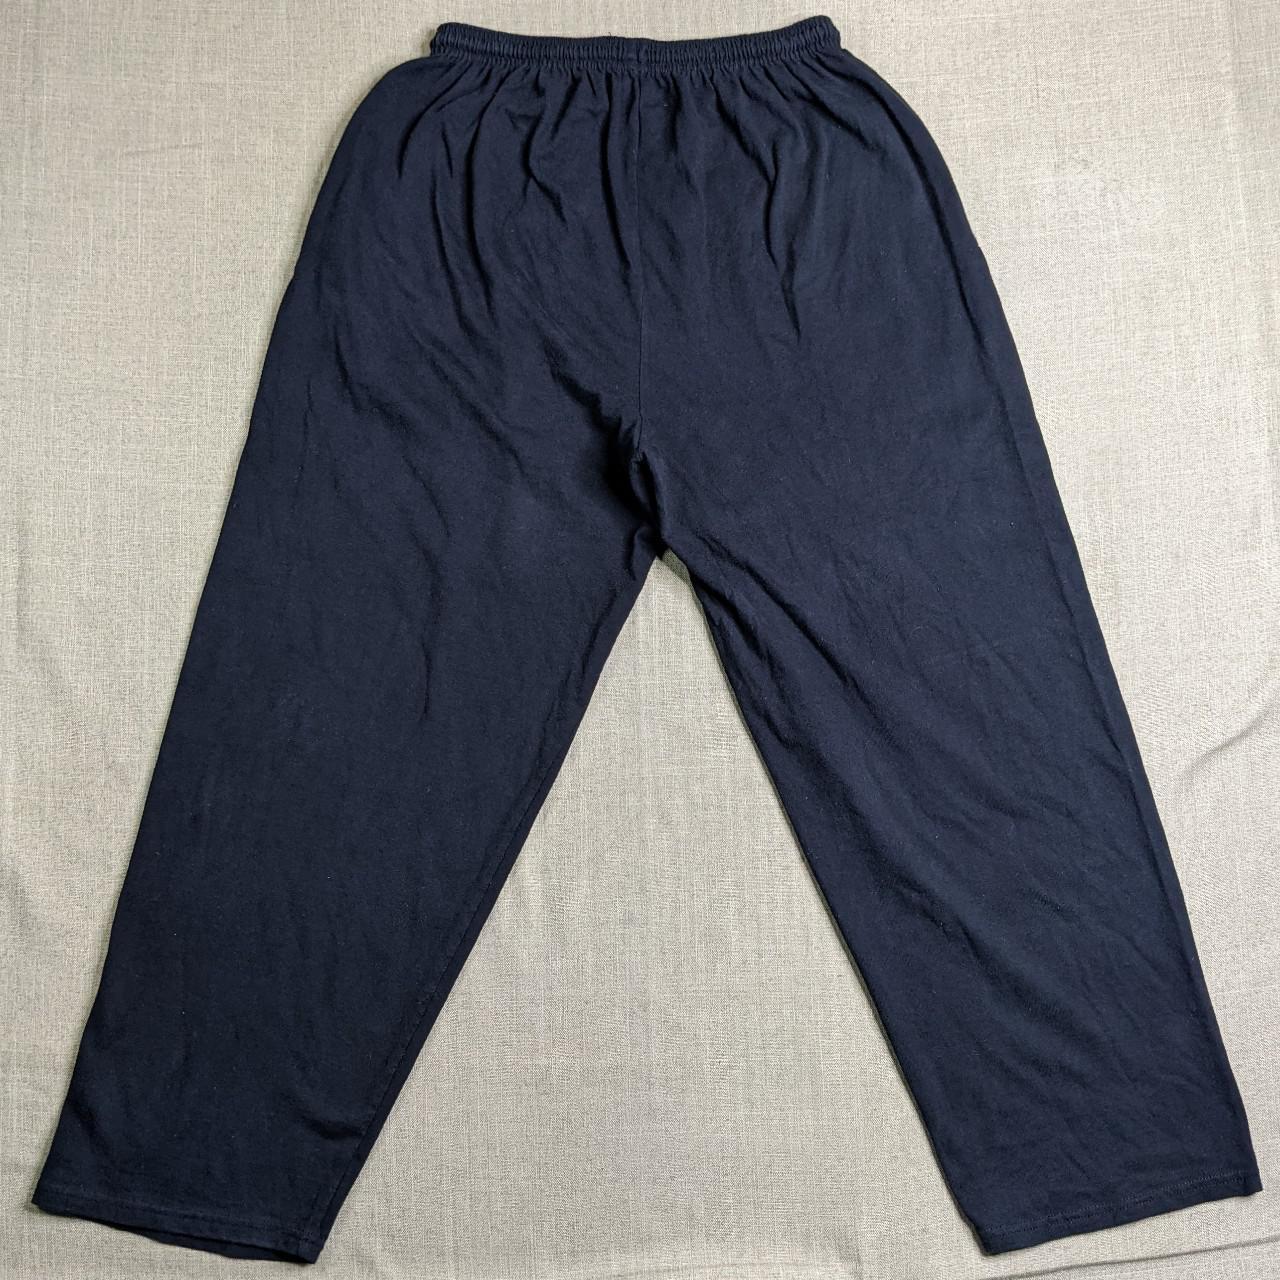 Product Image 2 - Vintage Russell Athletic sweatpants. Men's